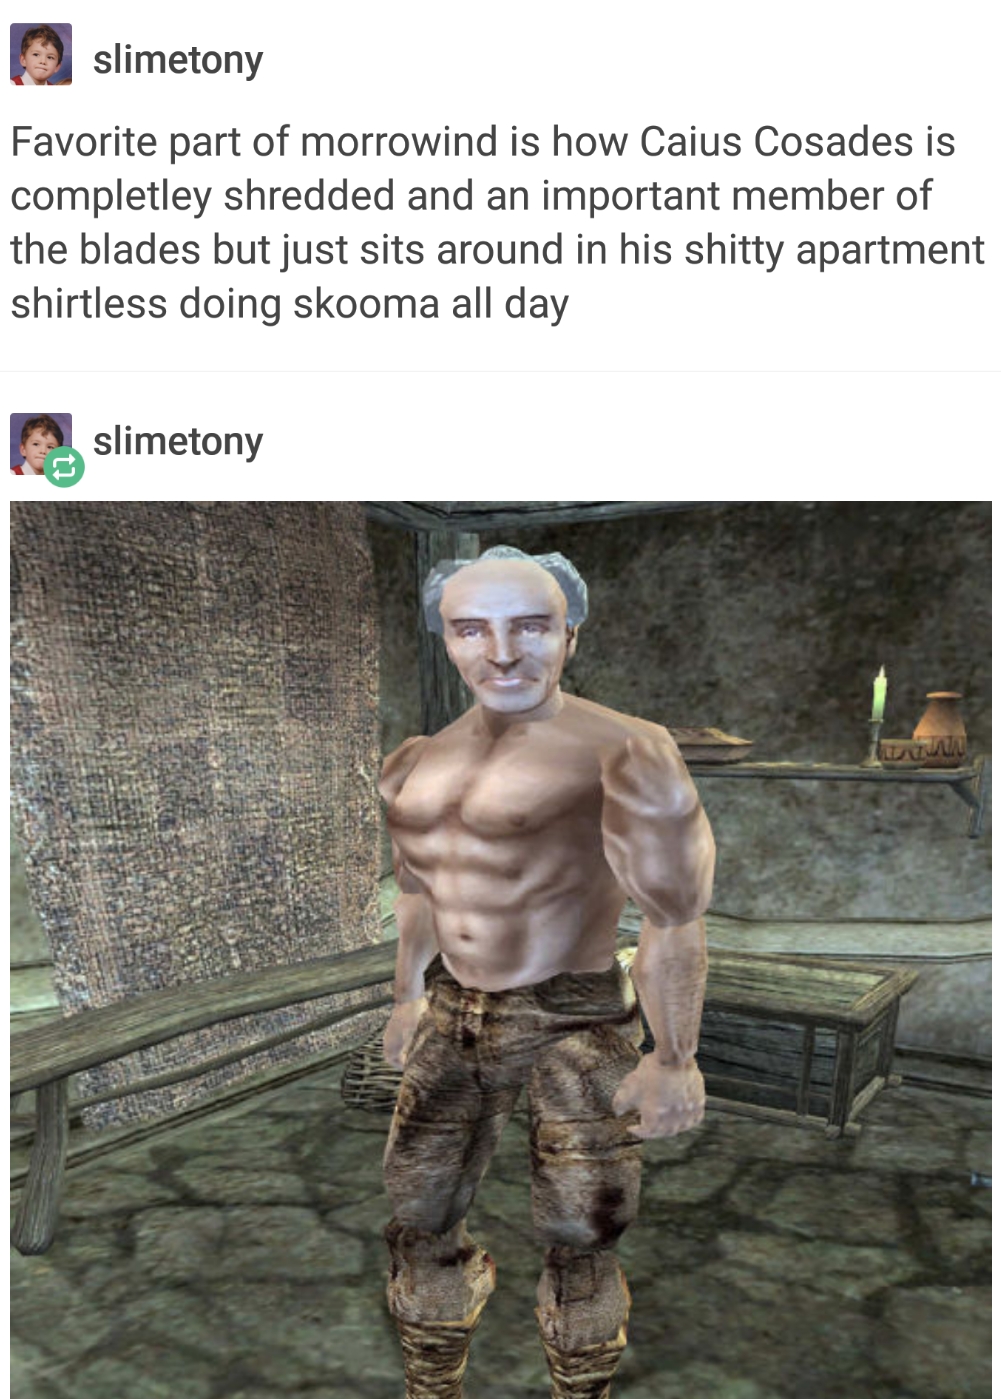 caius cosades meme - slimetony Favorite part of morrowind is how Caius Cosades is completley shredded and an important member of the blades but just sits around in his shitty apartment shirtless doing skooma all day slimetony